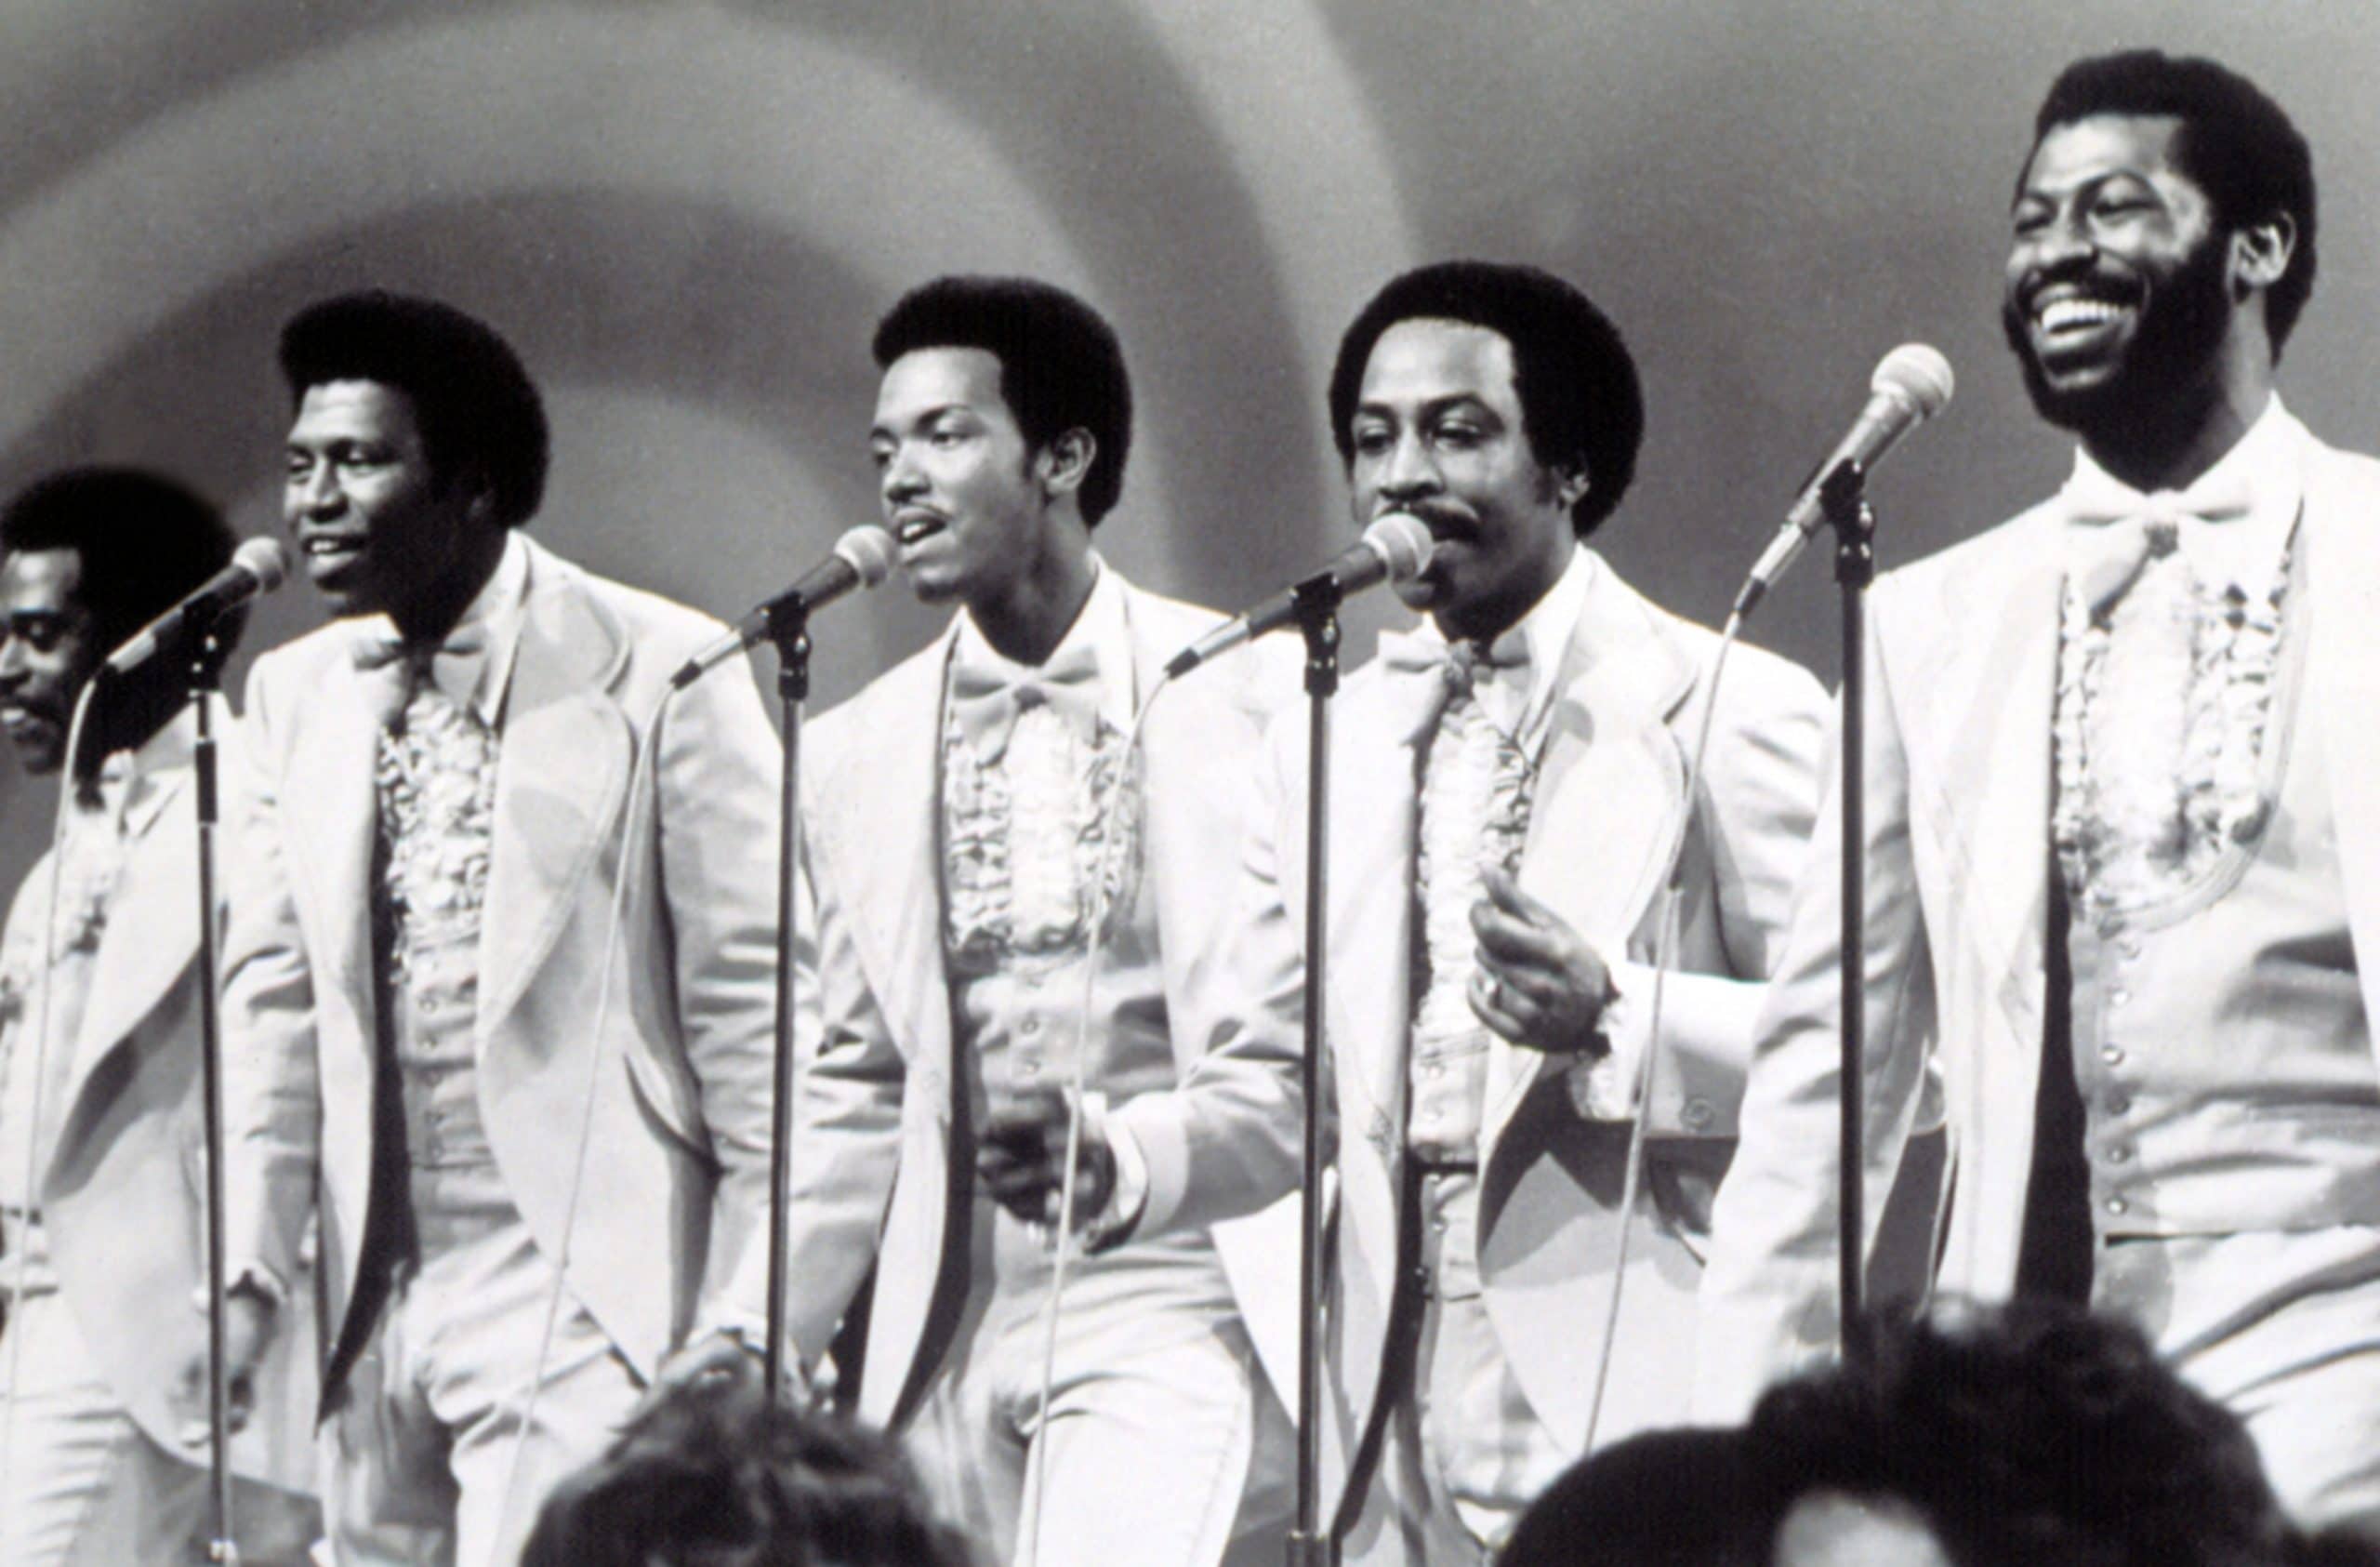 Harold Melvin and the Blue Notes, ca. 1975